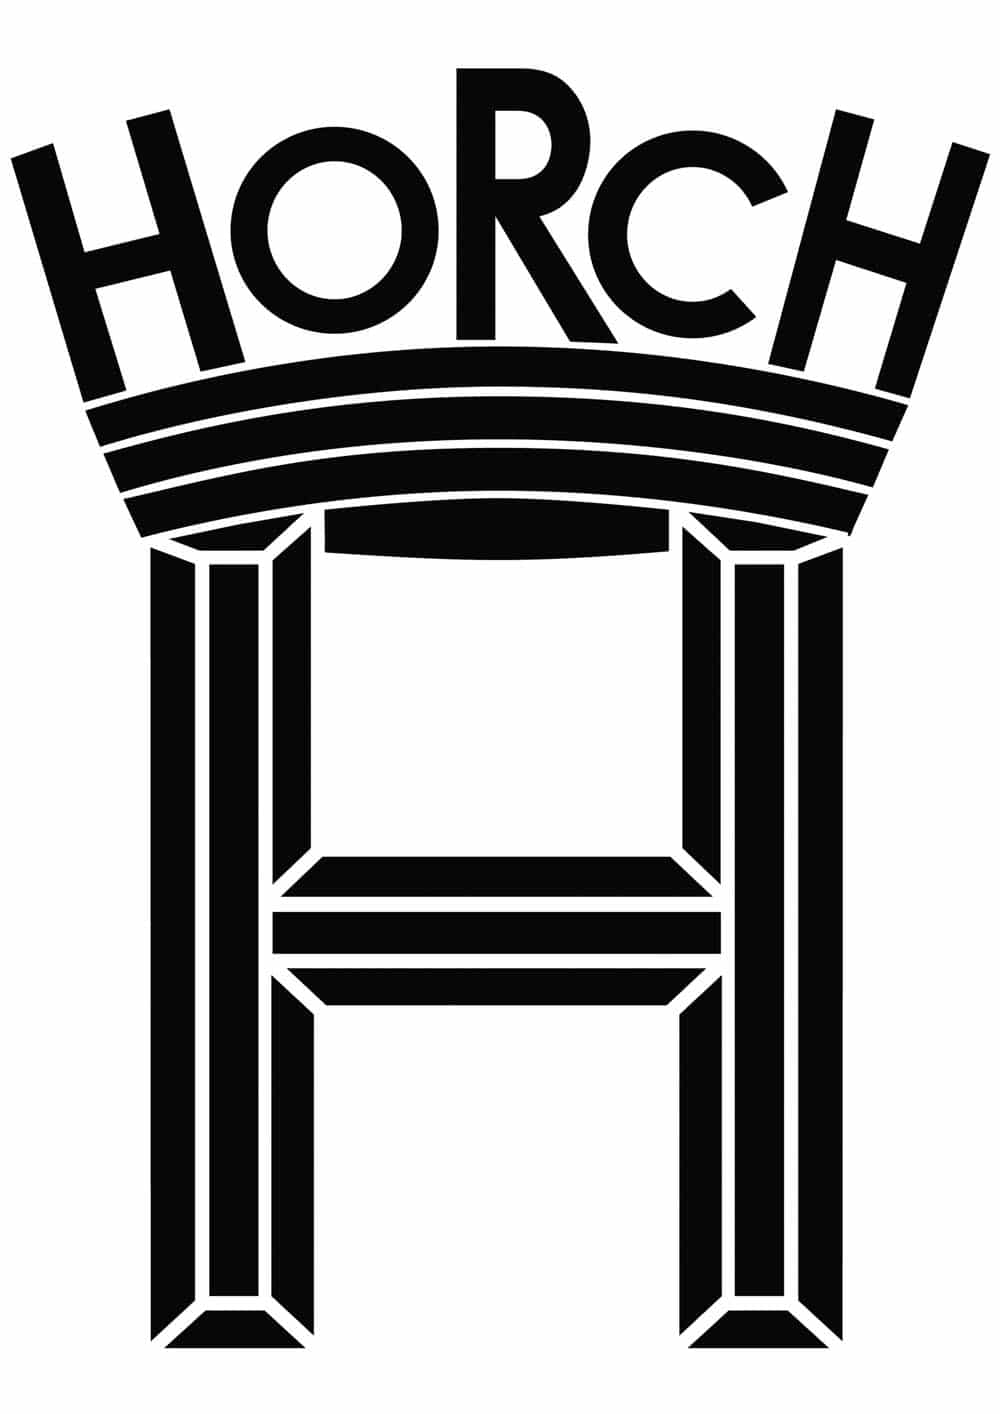 Horch (1899)